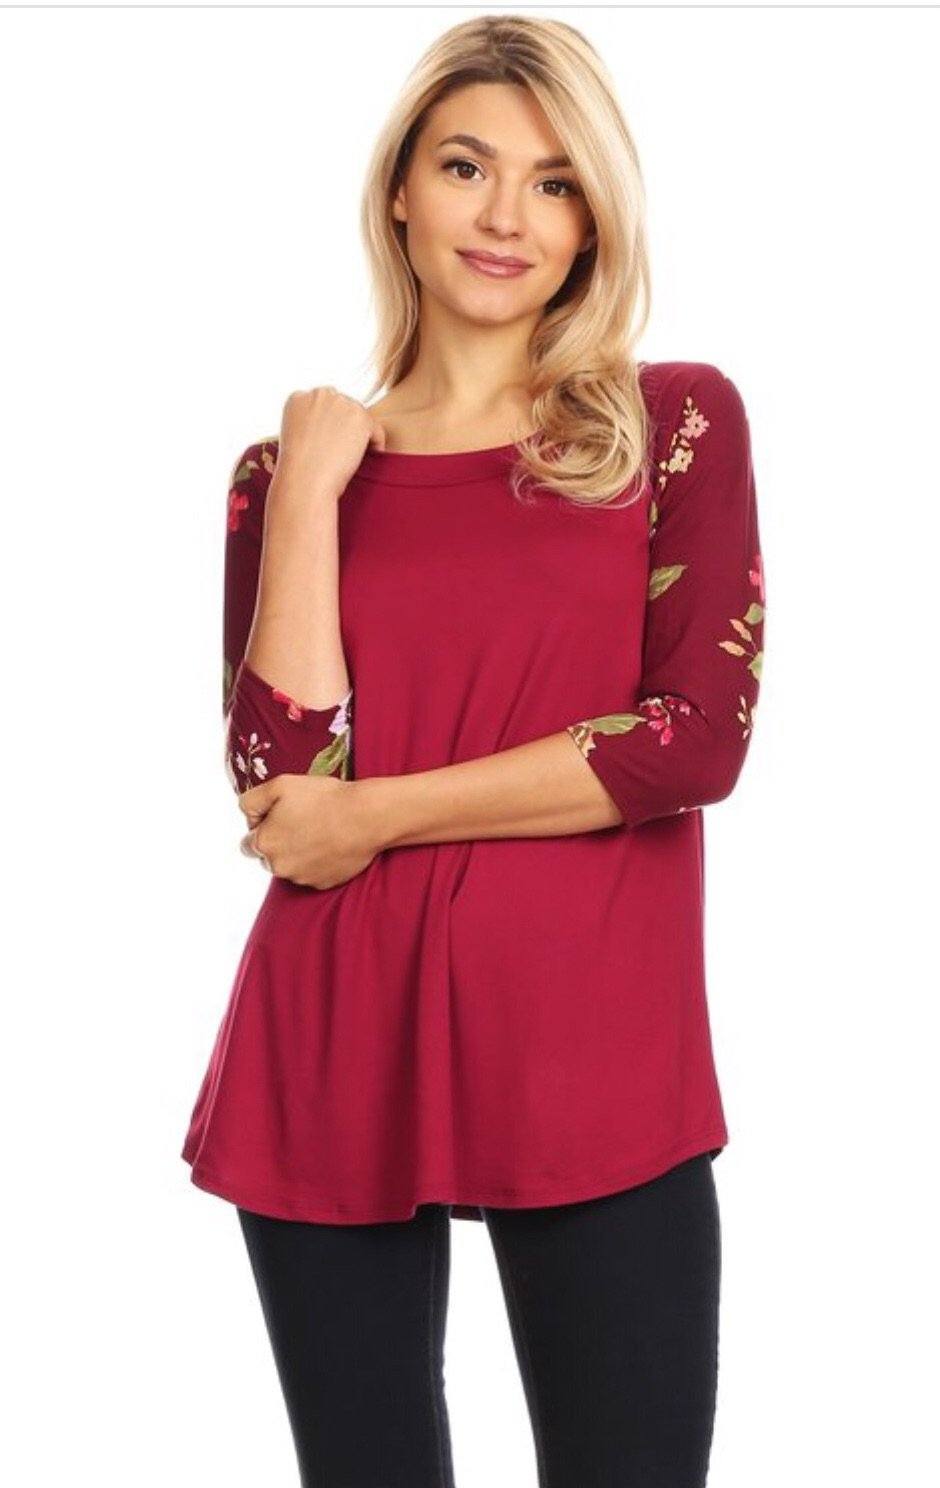 Women's Maroon Raglan Tunic Top Floral Shirt: S/M/L Tunics MomMe and More 